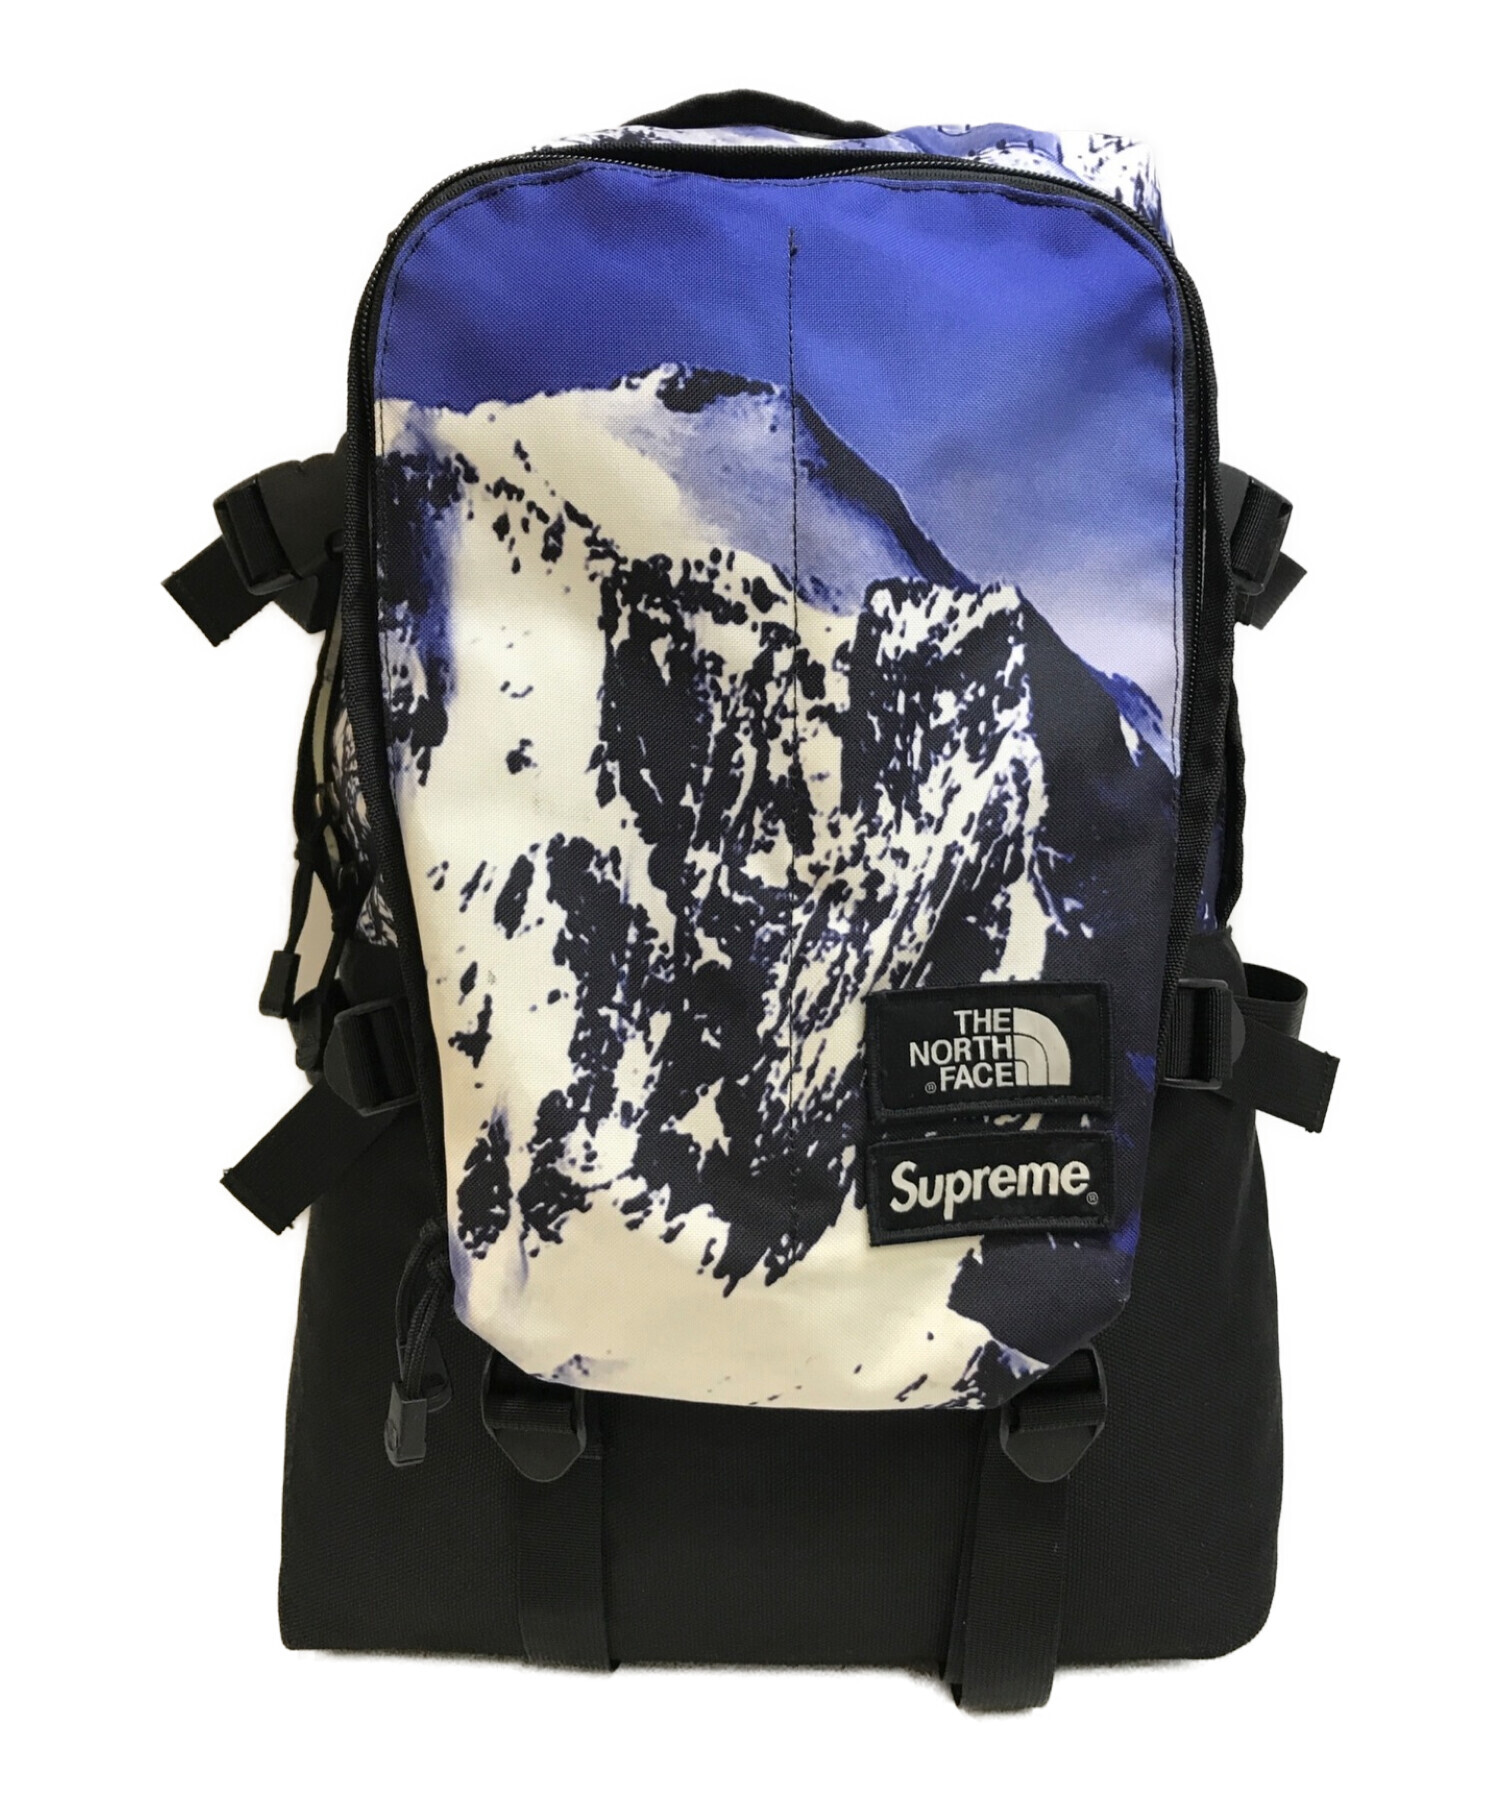 Supreme (シュプリーム) THE NORTH FACE (ザ ノース フェイス) MOUNTAIN EXPEDITION BACKPACK  ブルー×ブラック